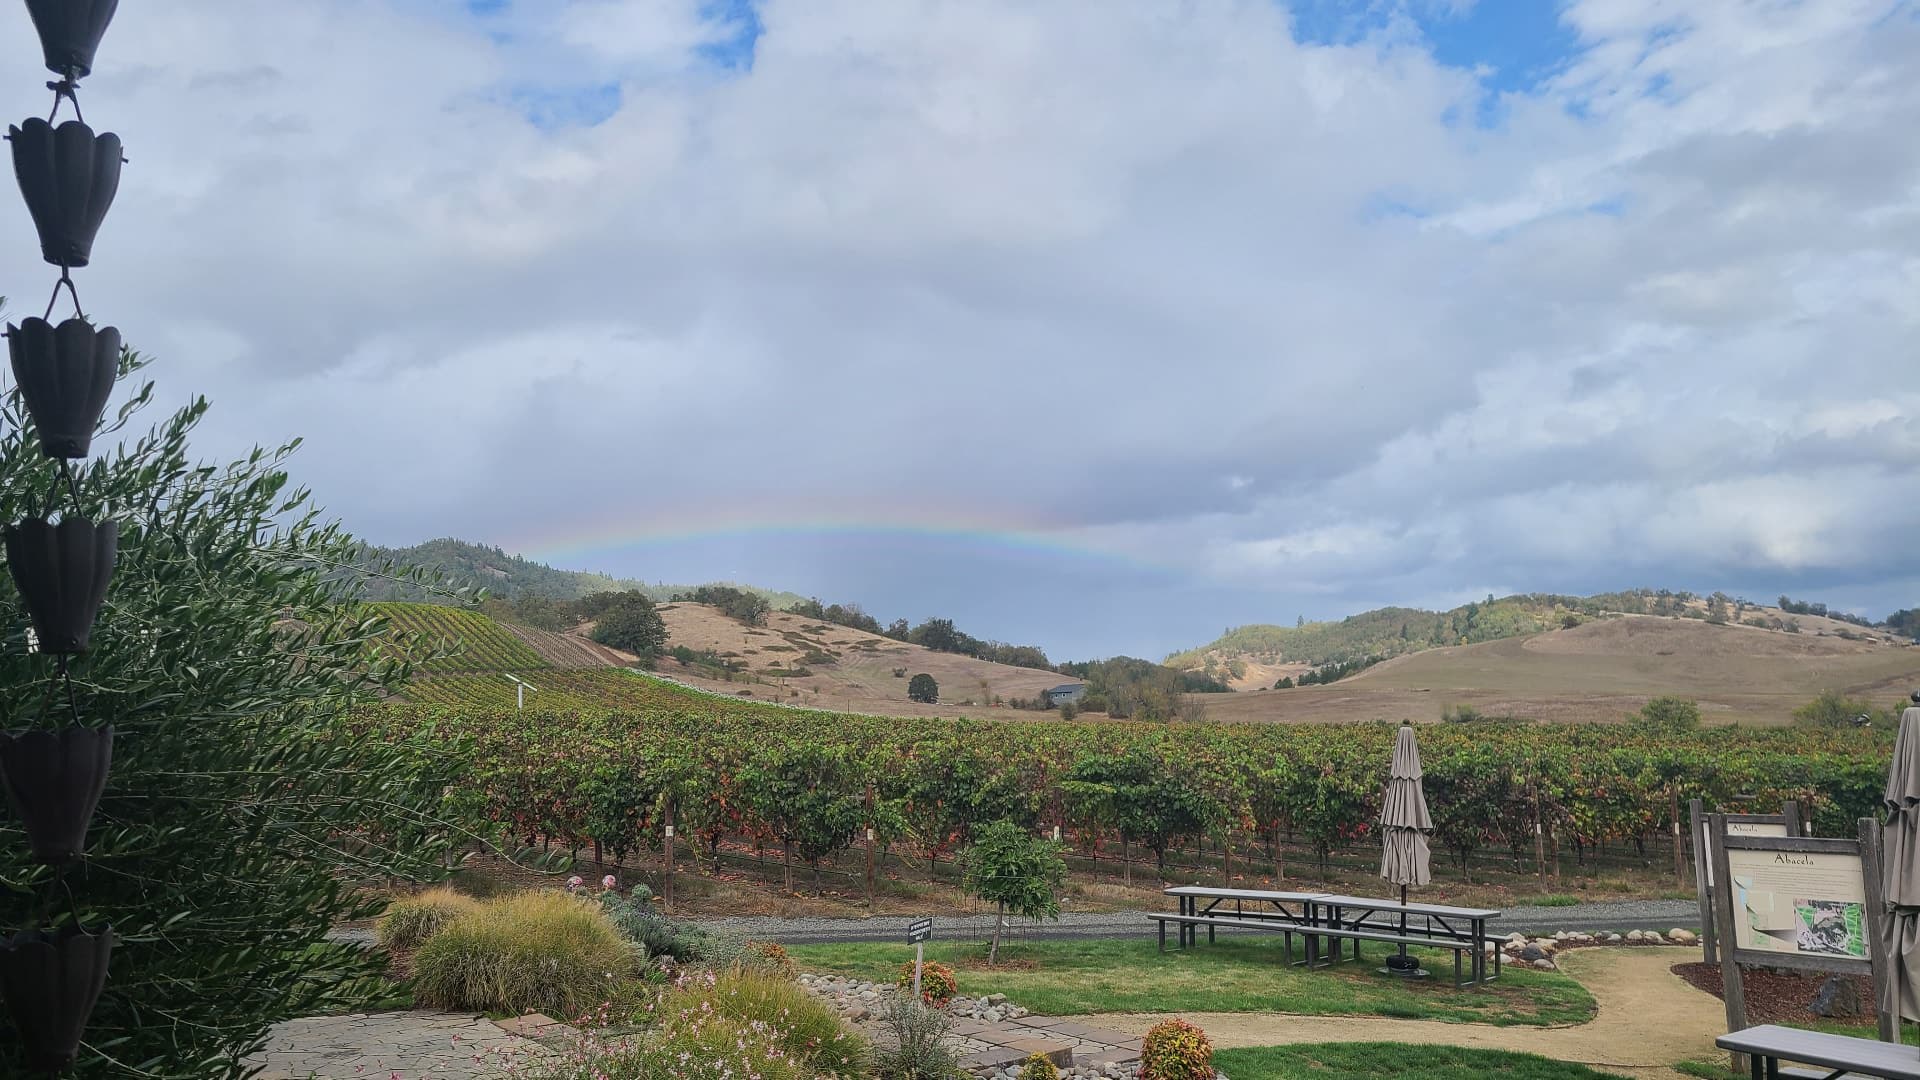 Rolling hills of grape vines at a winery with a small rainbow in the cloudy sky